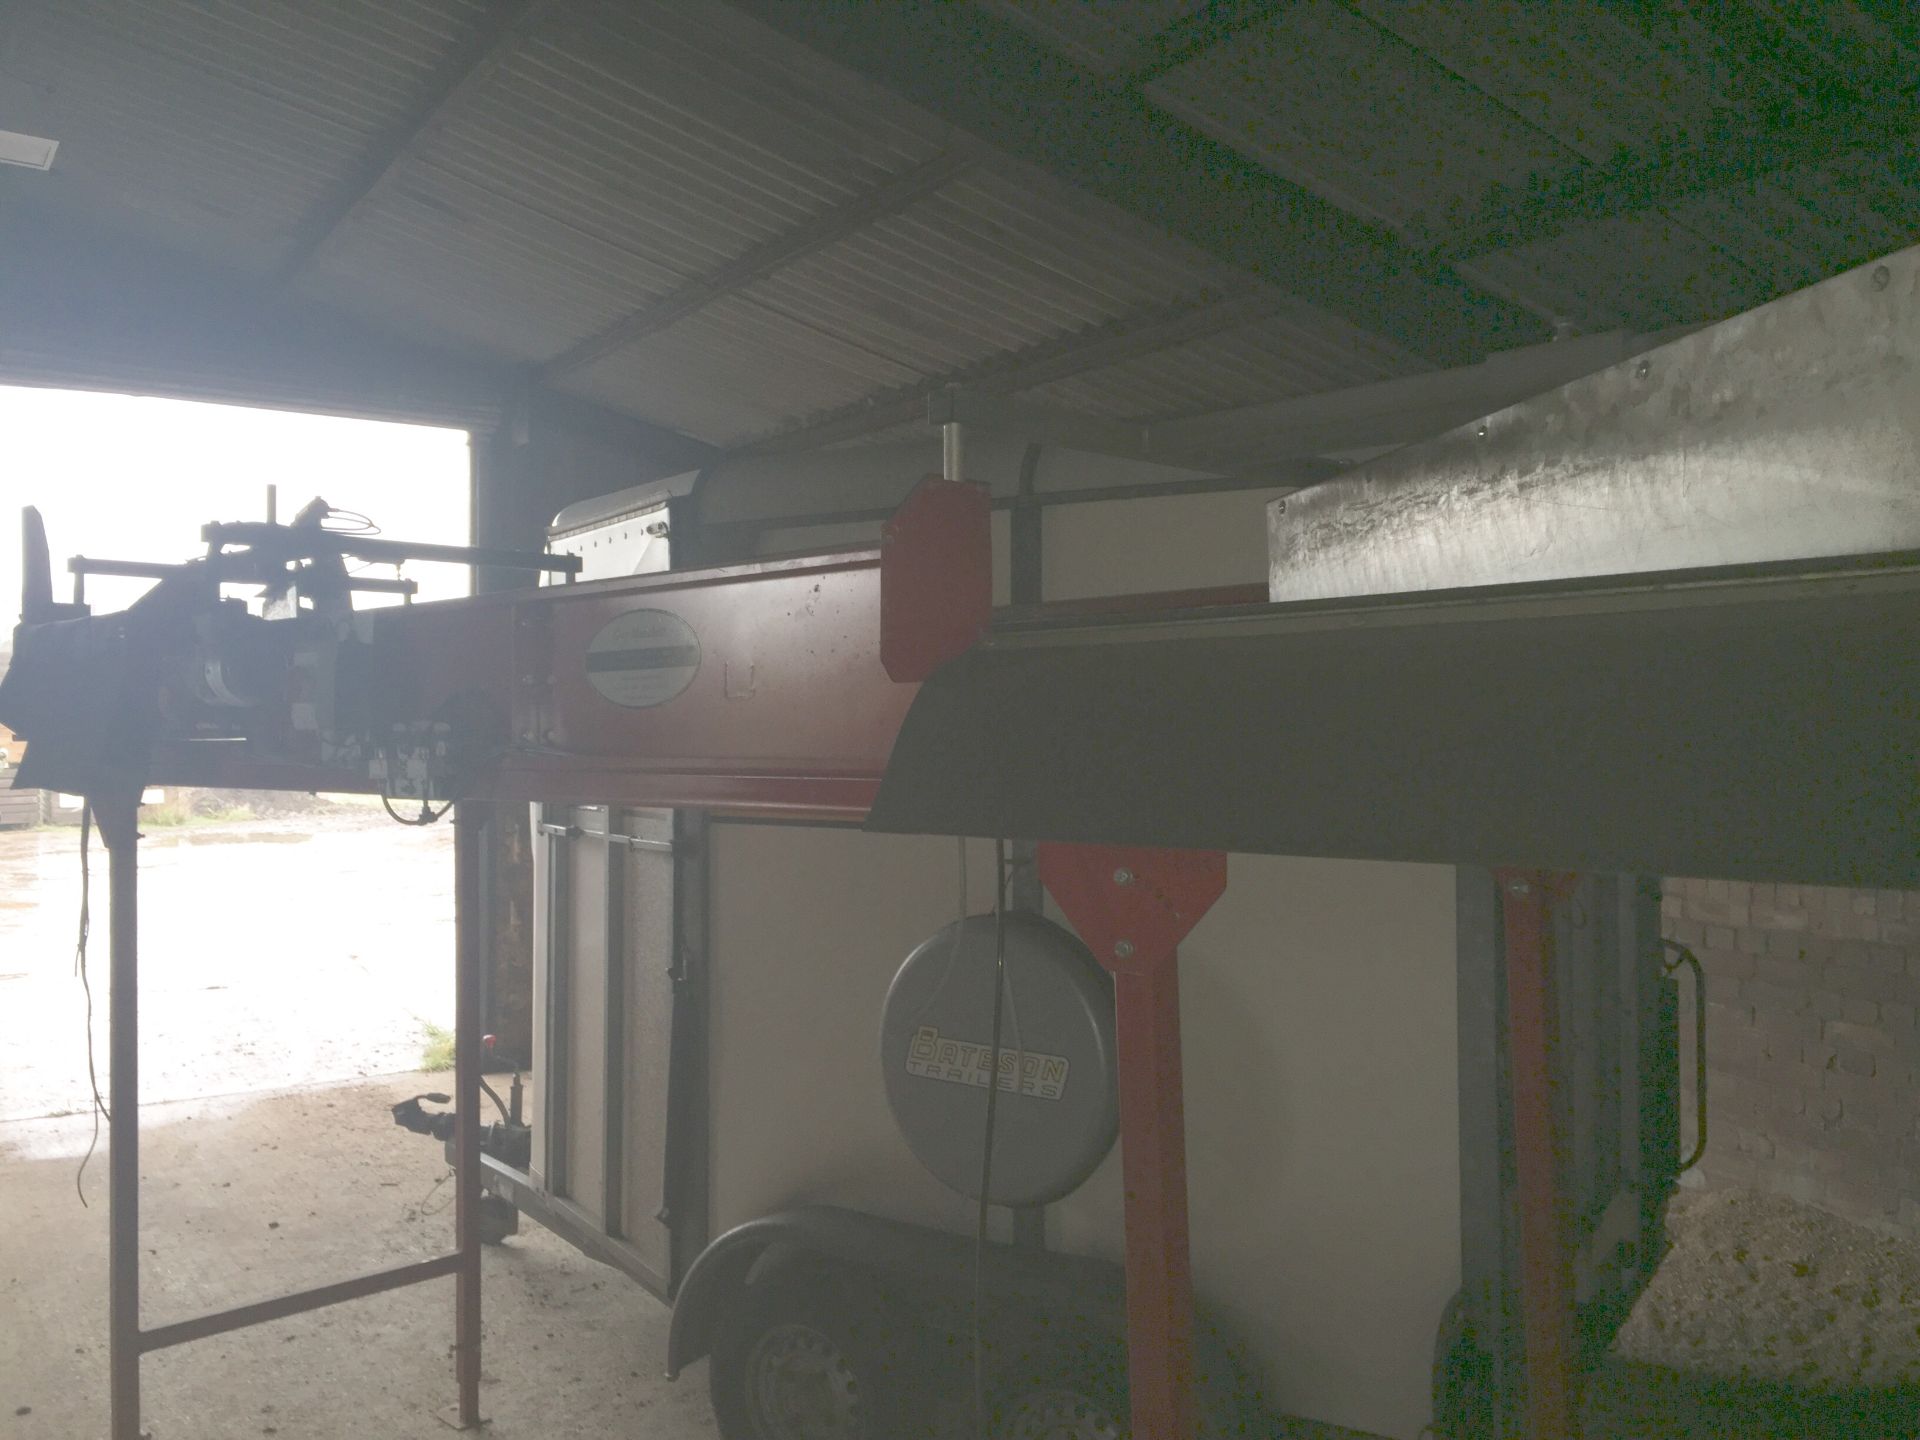 Tong Recirculating Conveyor, Length: 5m, Width: 1m, Automated System to Feed Two Separate Machines, - Image 2 of 3